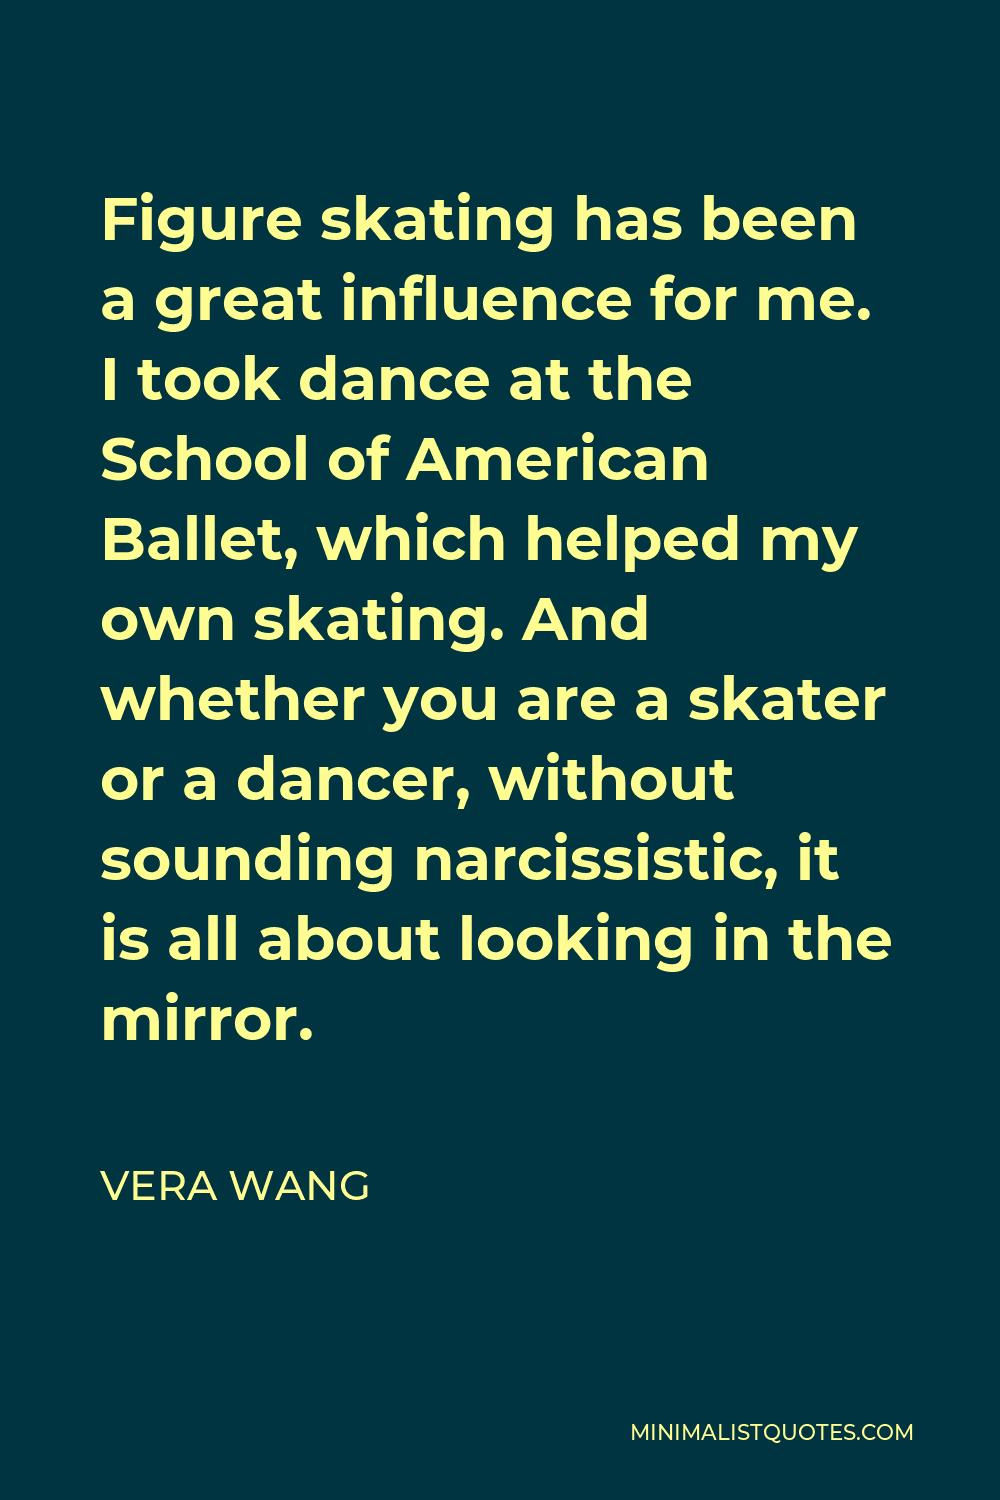 Vera Wang Quote - Figure skating has been a great influence for me. I took dance at the School of American Ballet, which helped my own skating. And whether you are a skater or a dancer, without sounding narcissistic, it is all about looking in the mirror.